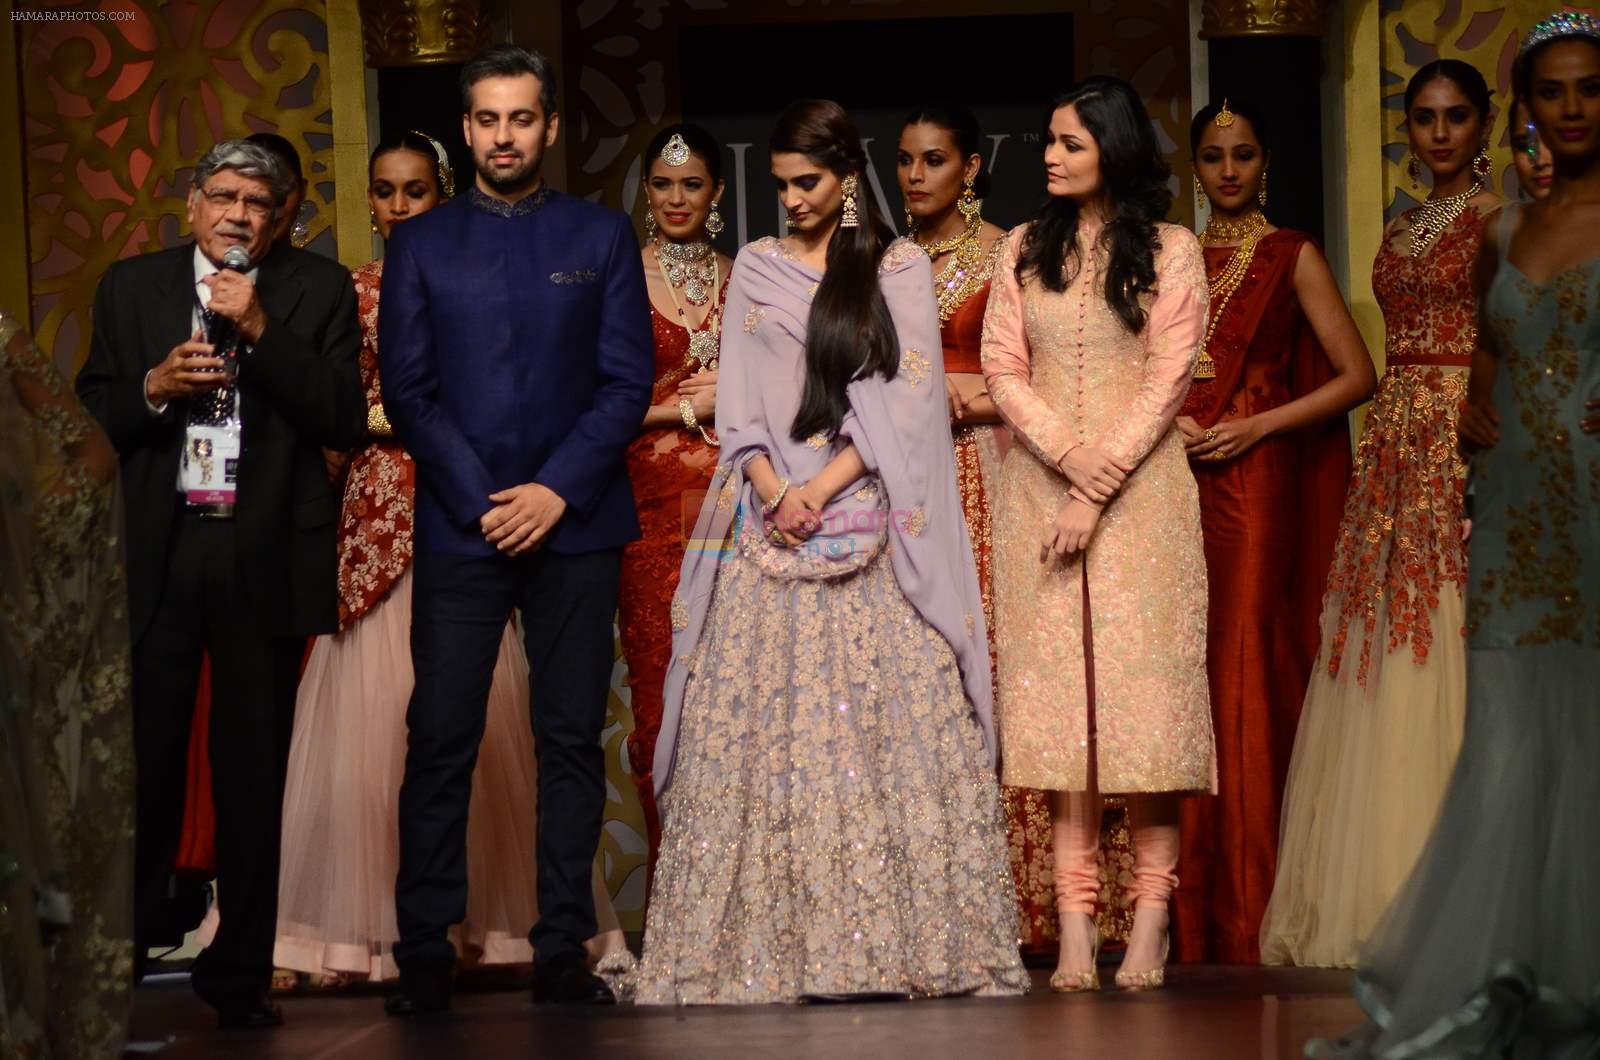 Sonam Kapoor walk the ramp for Shyamal bhumika Grand Finale Show at IIJW 2015 on 6th Aug 2015